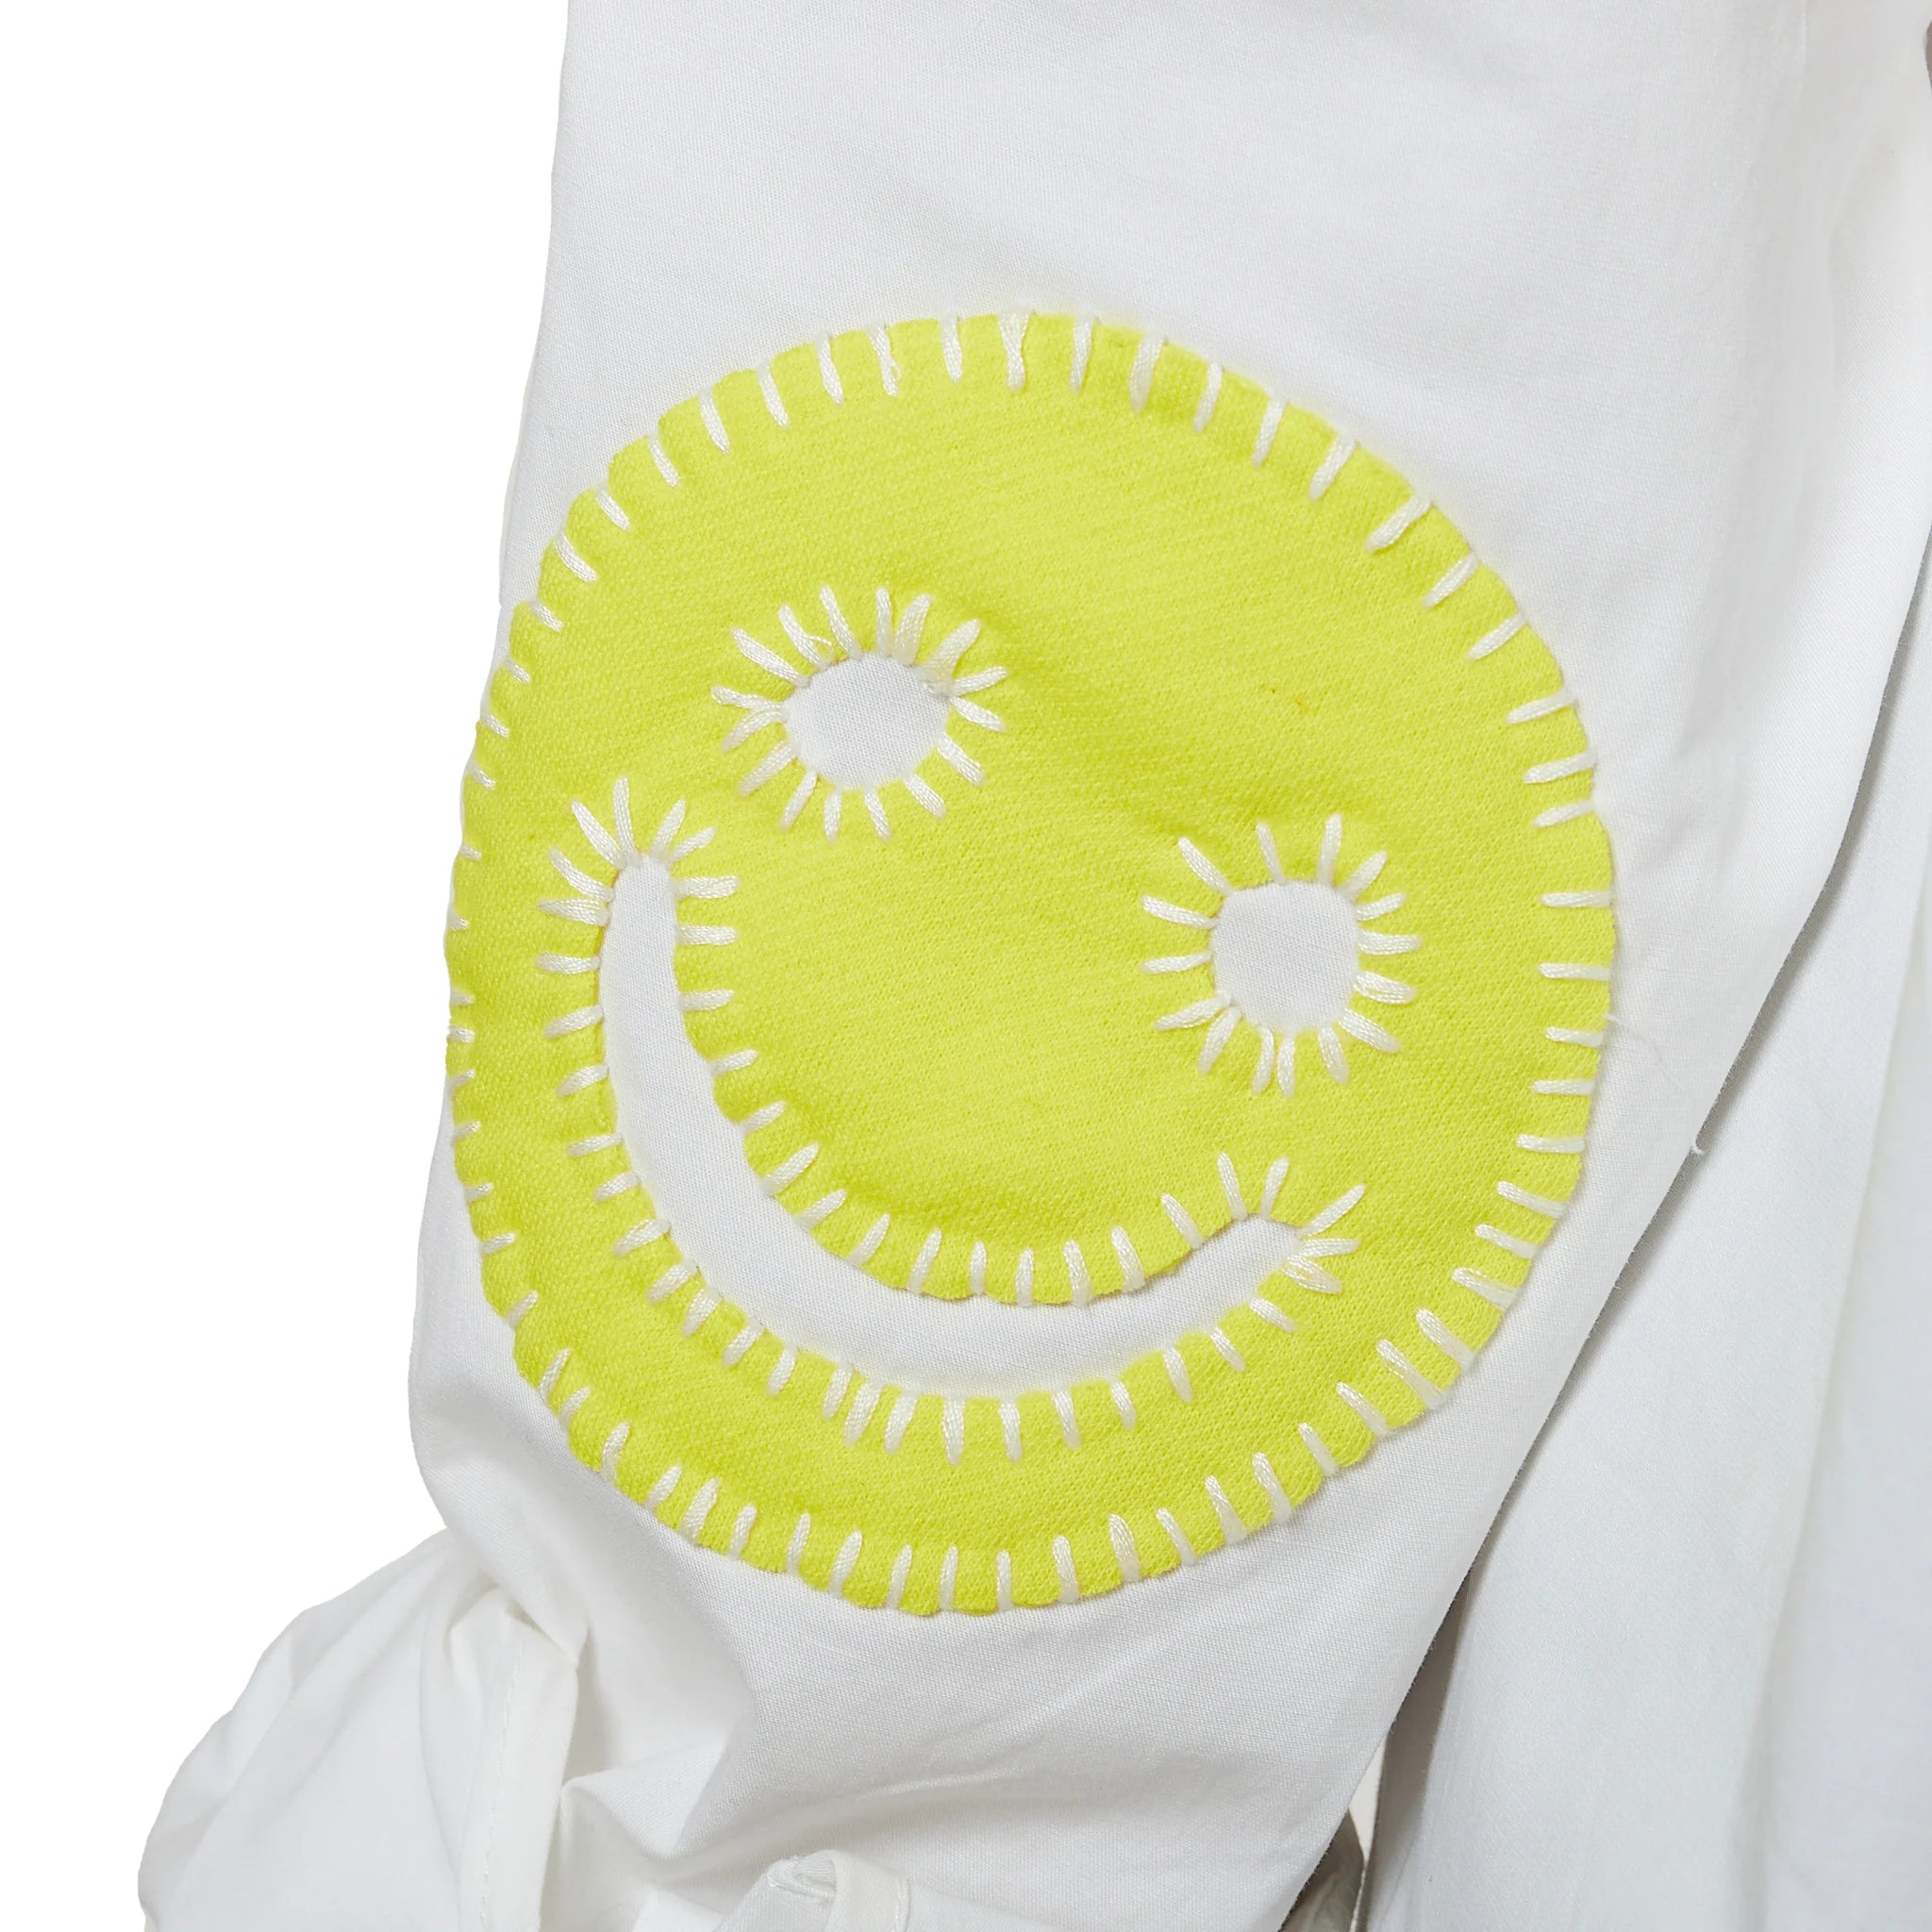 Smiley Face Shirt in White